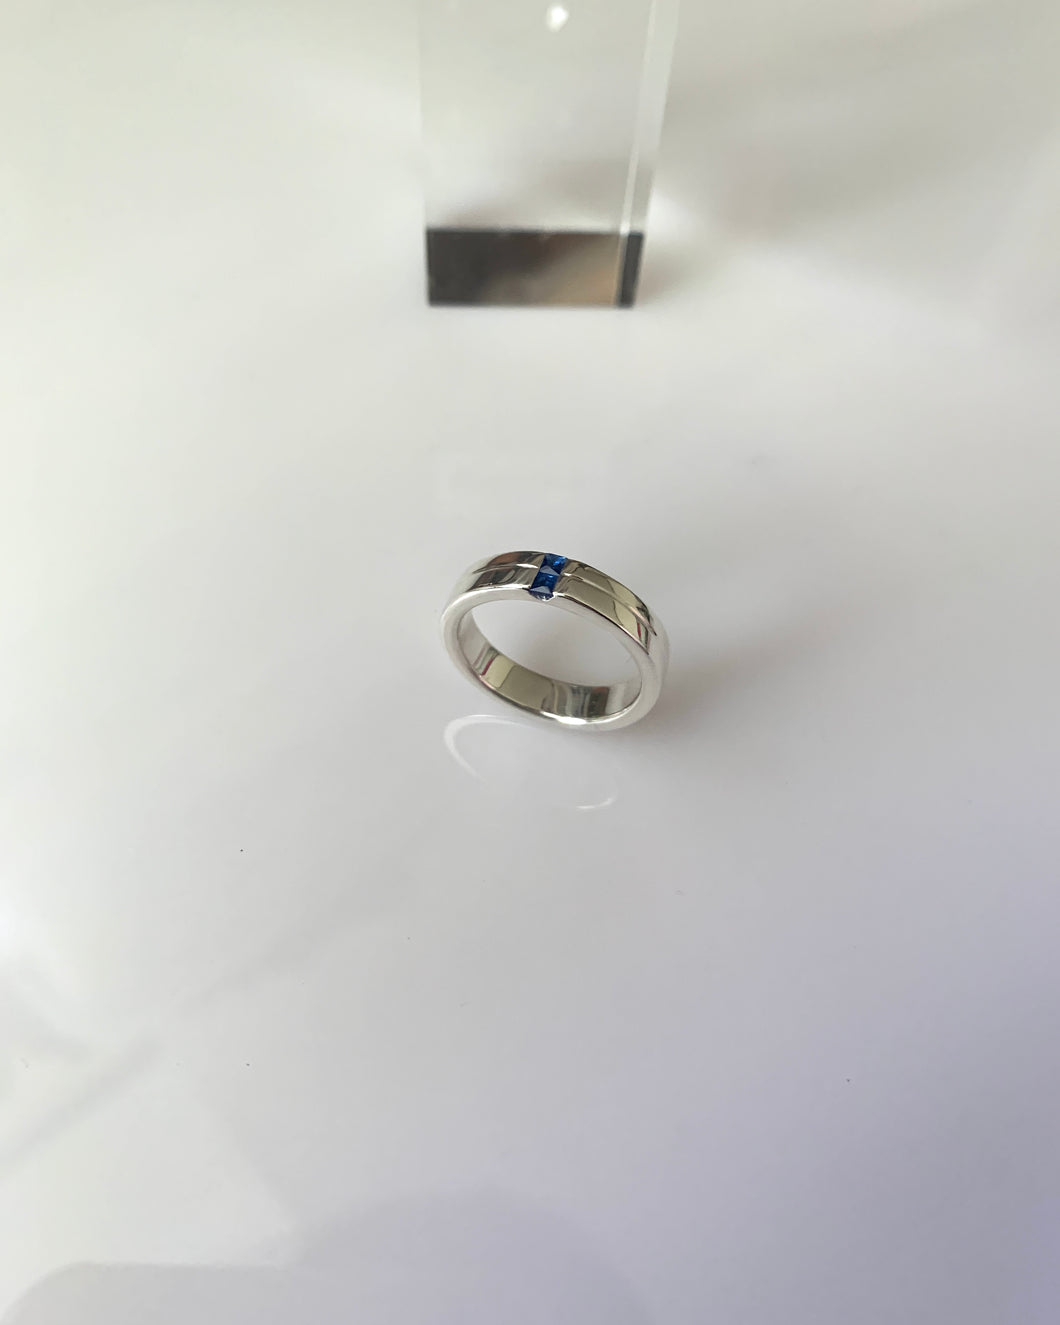 A white gold single band with a textured line at the middle of its thickness. And 2mm princess cut blue sapphires as its center stones.